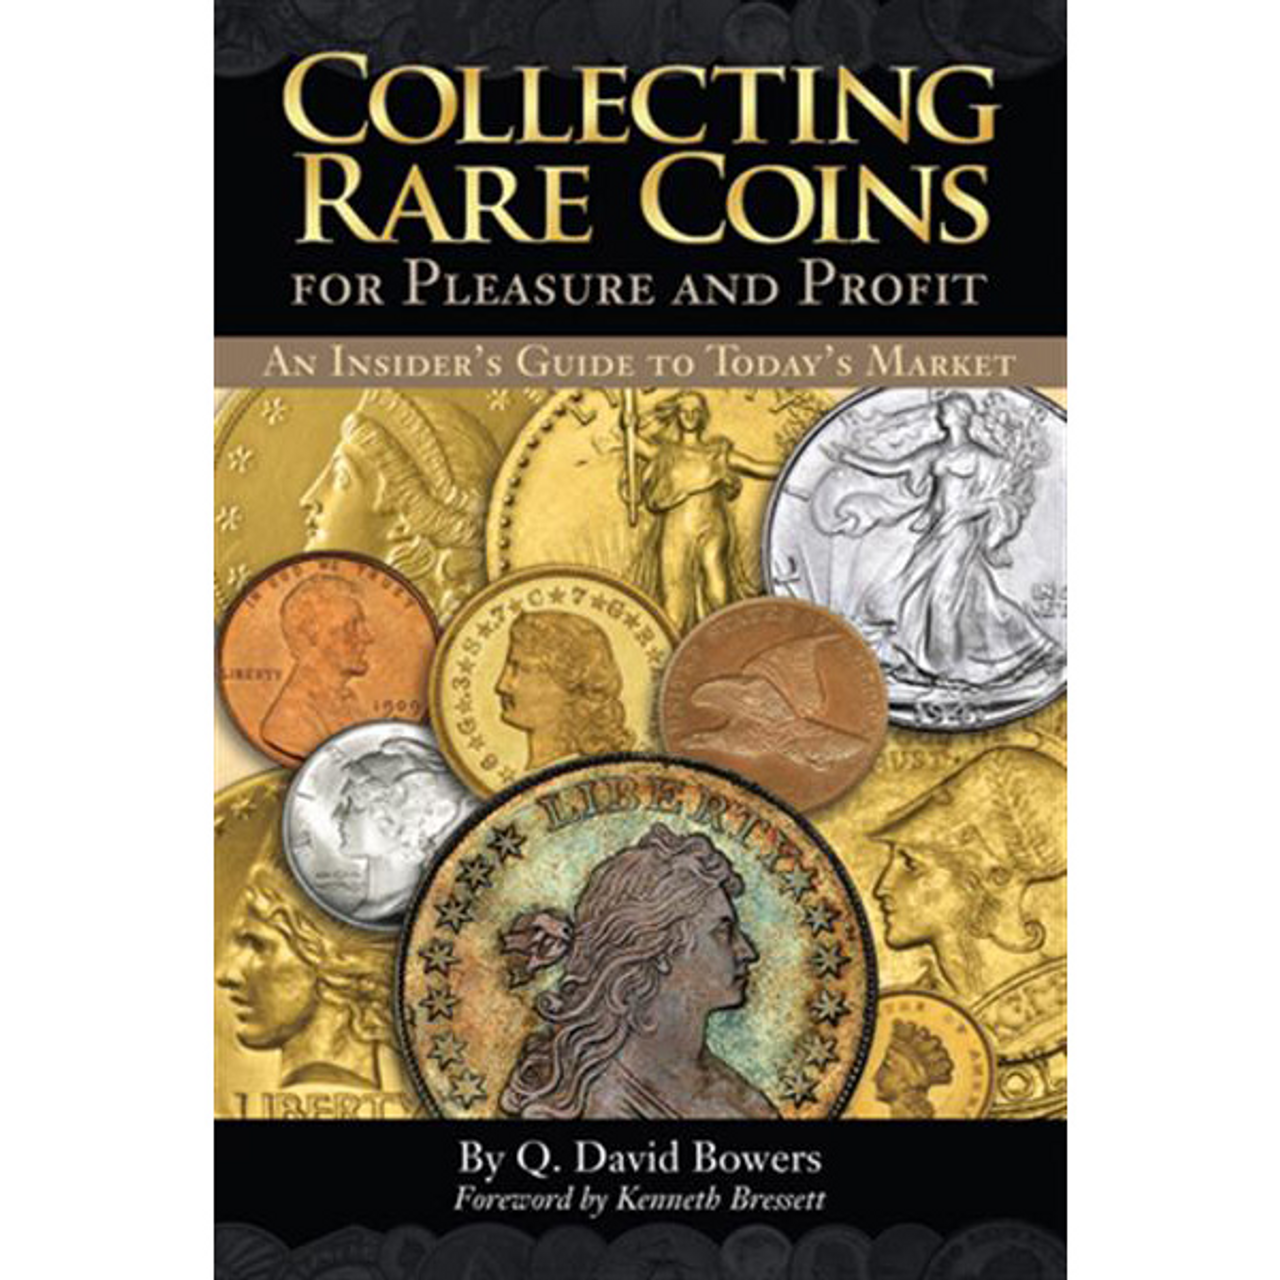 Coin collectors on hunt for that rare find